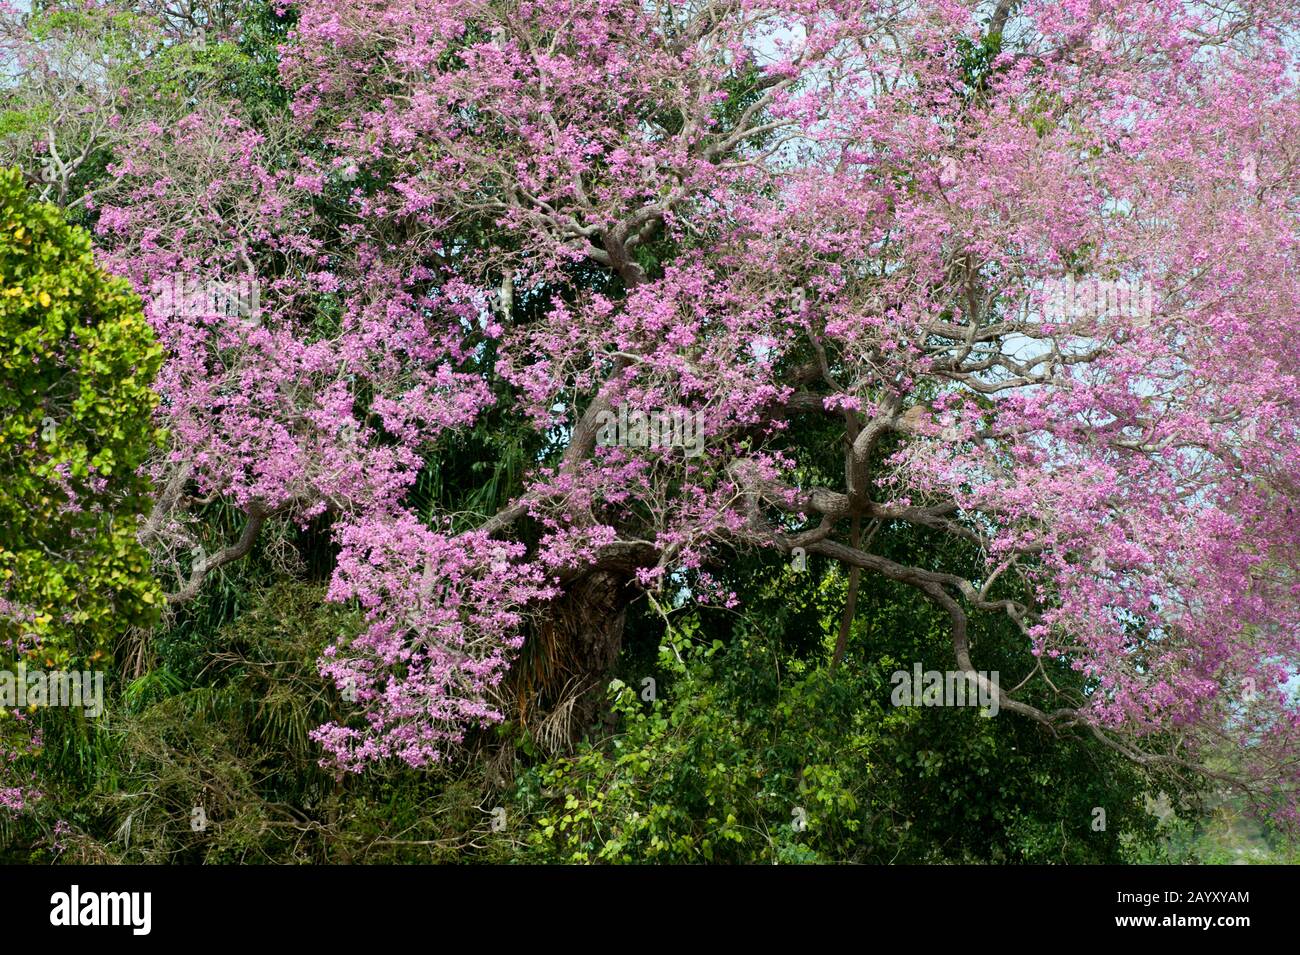 A flowering Pink trumpet tree (Tabebuia heterophylla) at Caiman Ranch in the Southern Pantanal in Brazil. Stock Photo